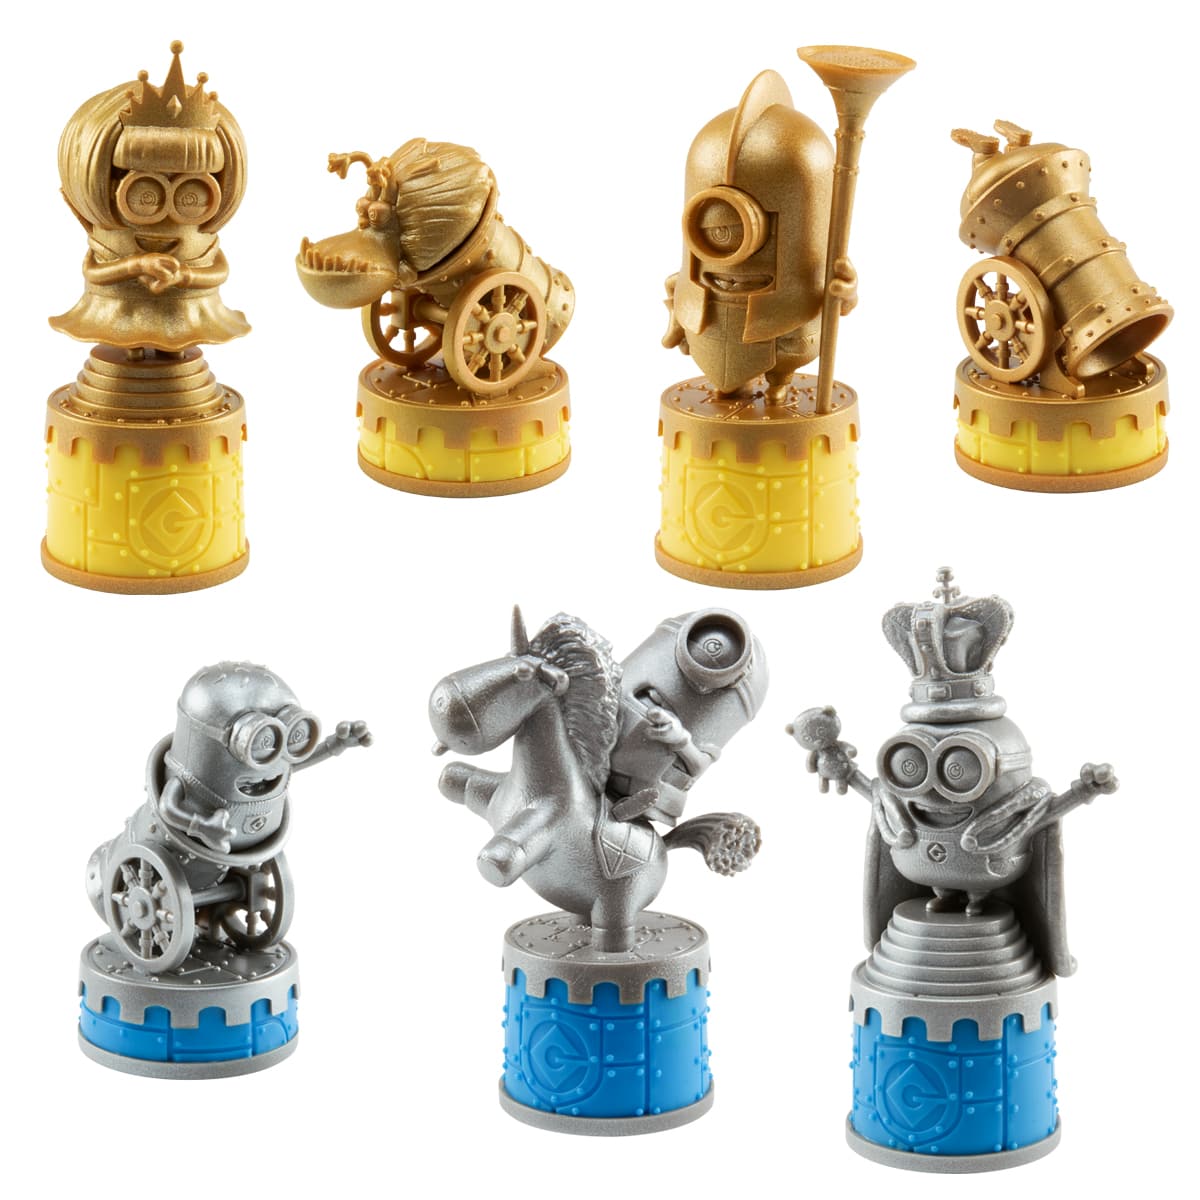 The Nobel Collection Minions 'Medieval Mayhem' Chess Set